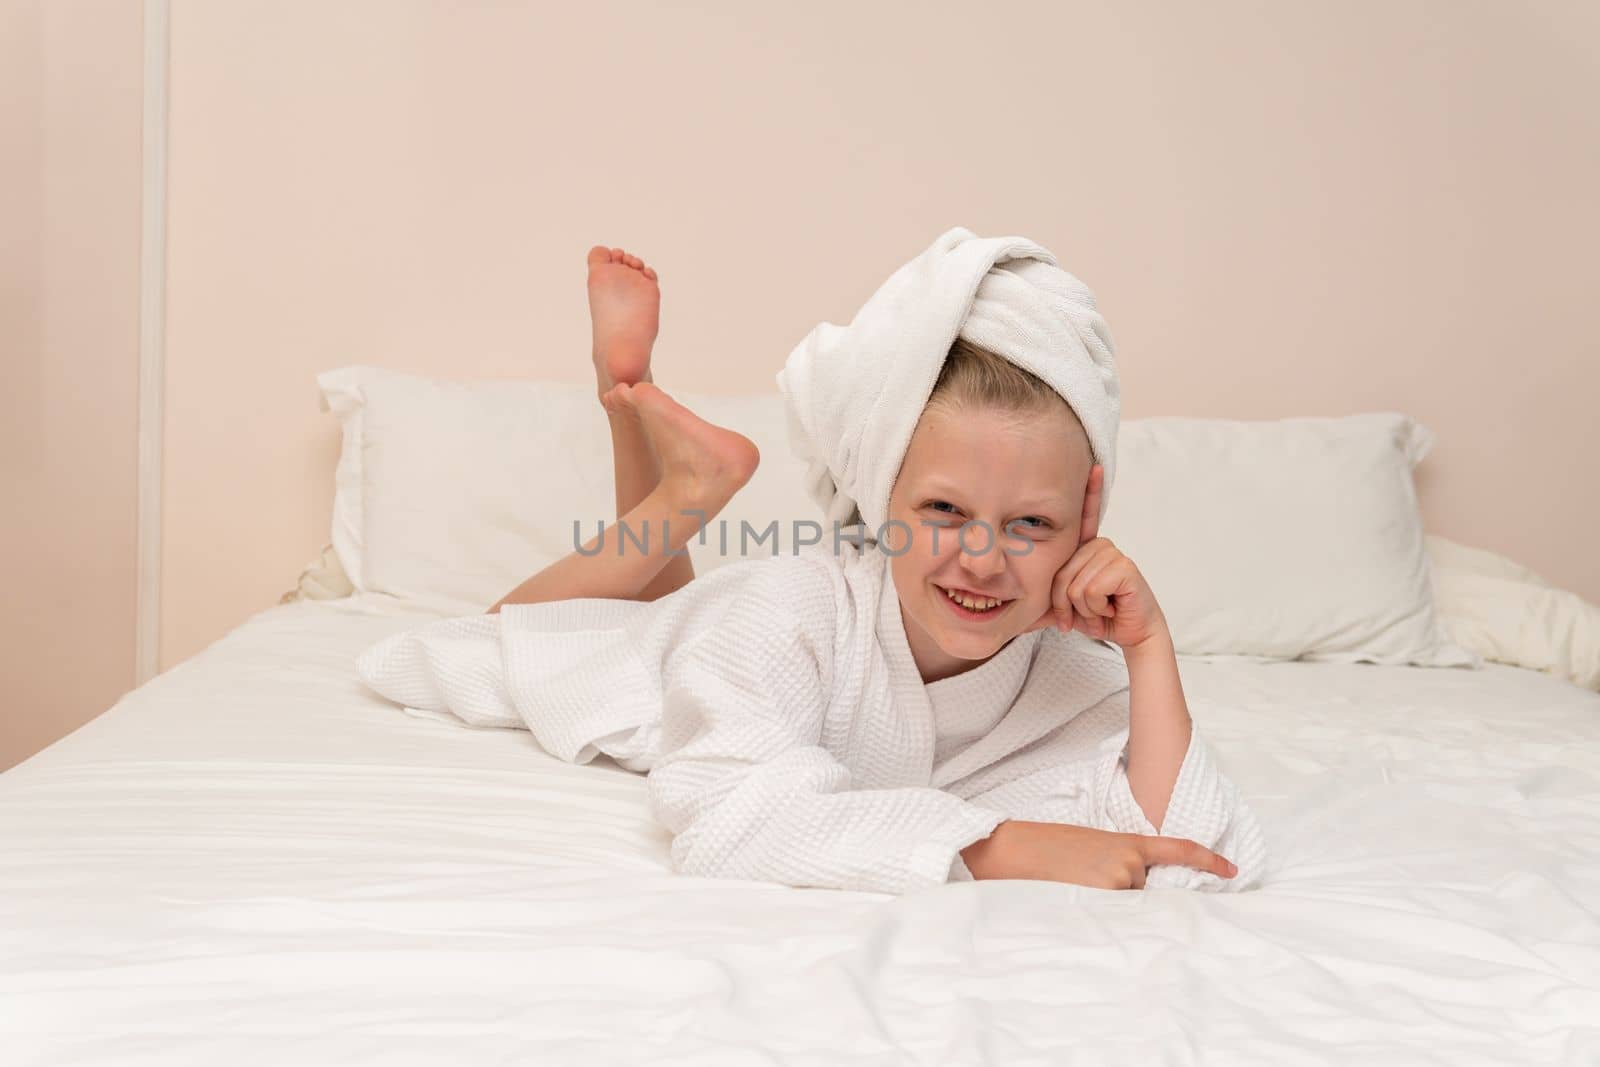 Smiling coffee smile elbows thinks Creek copyspace bathrobe bed cute, concept bathroom dressing for young and happy spa, towel background. Care kid fashion,